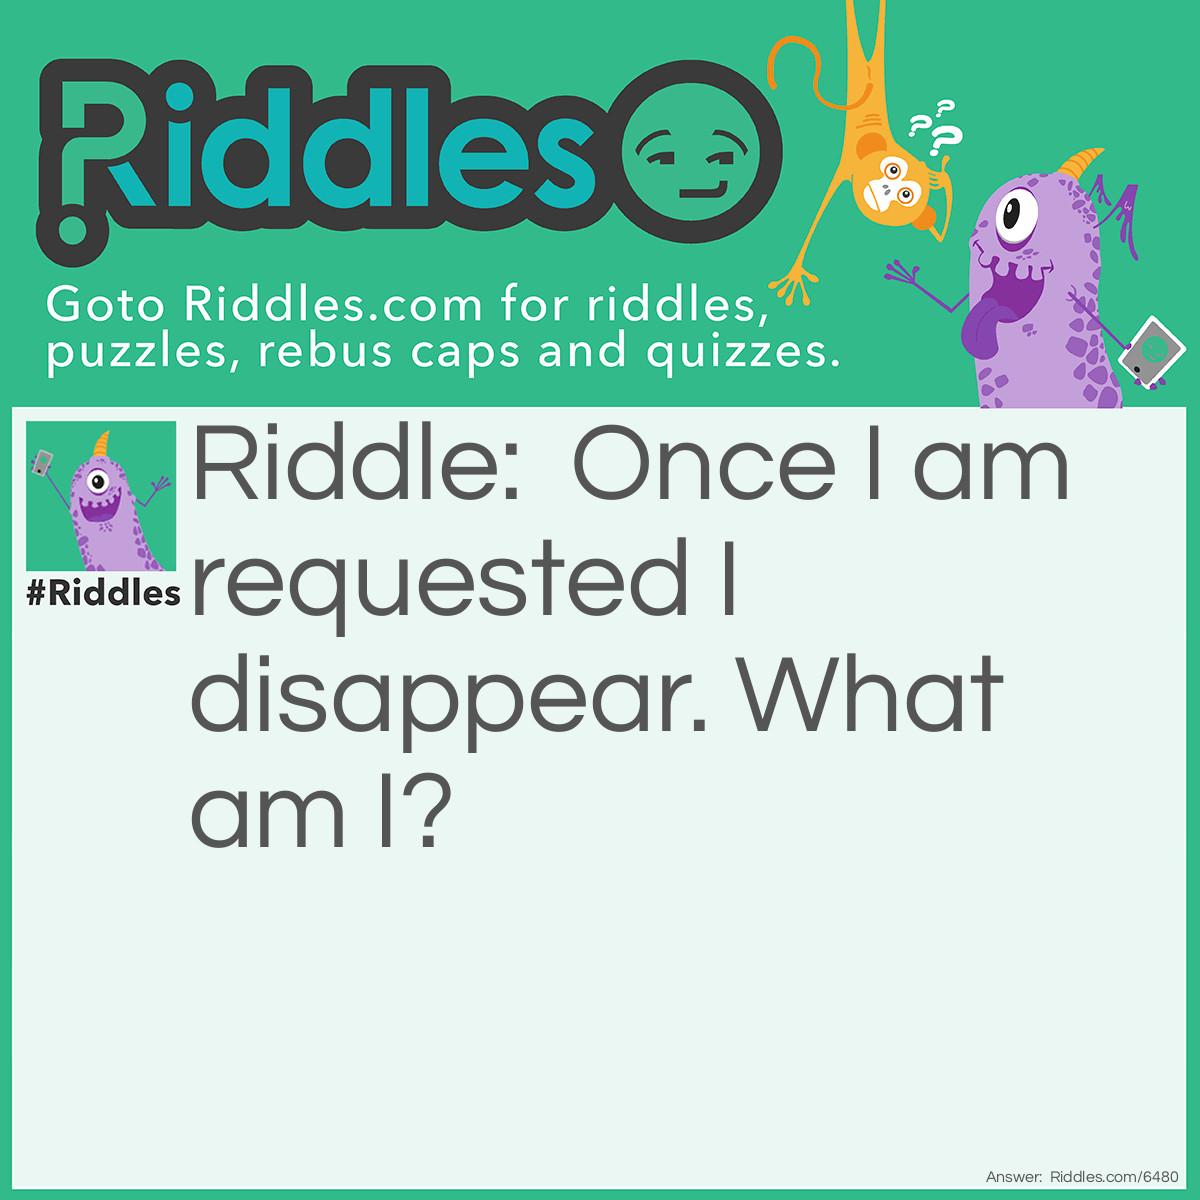 Riddle: Once I am requested I disappear. What am I? Answer: Silence.